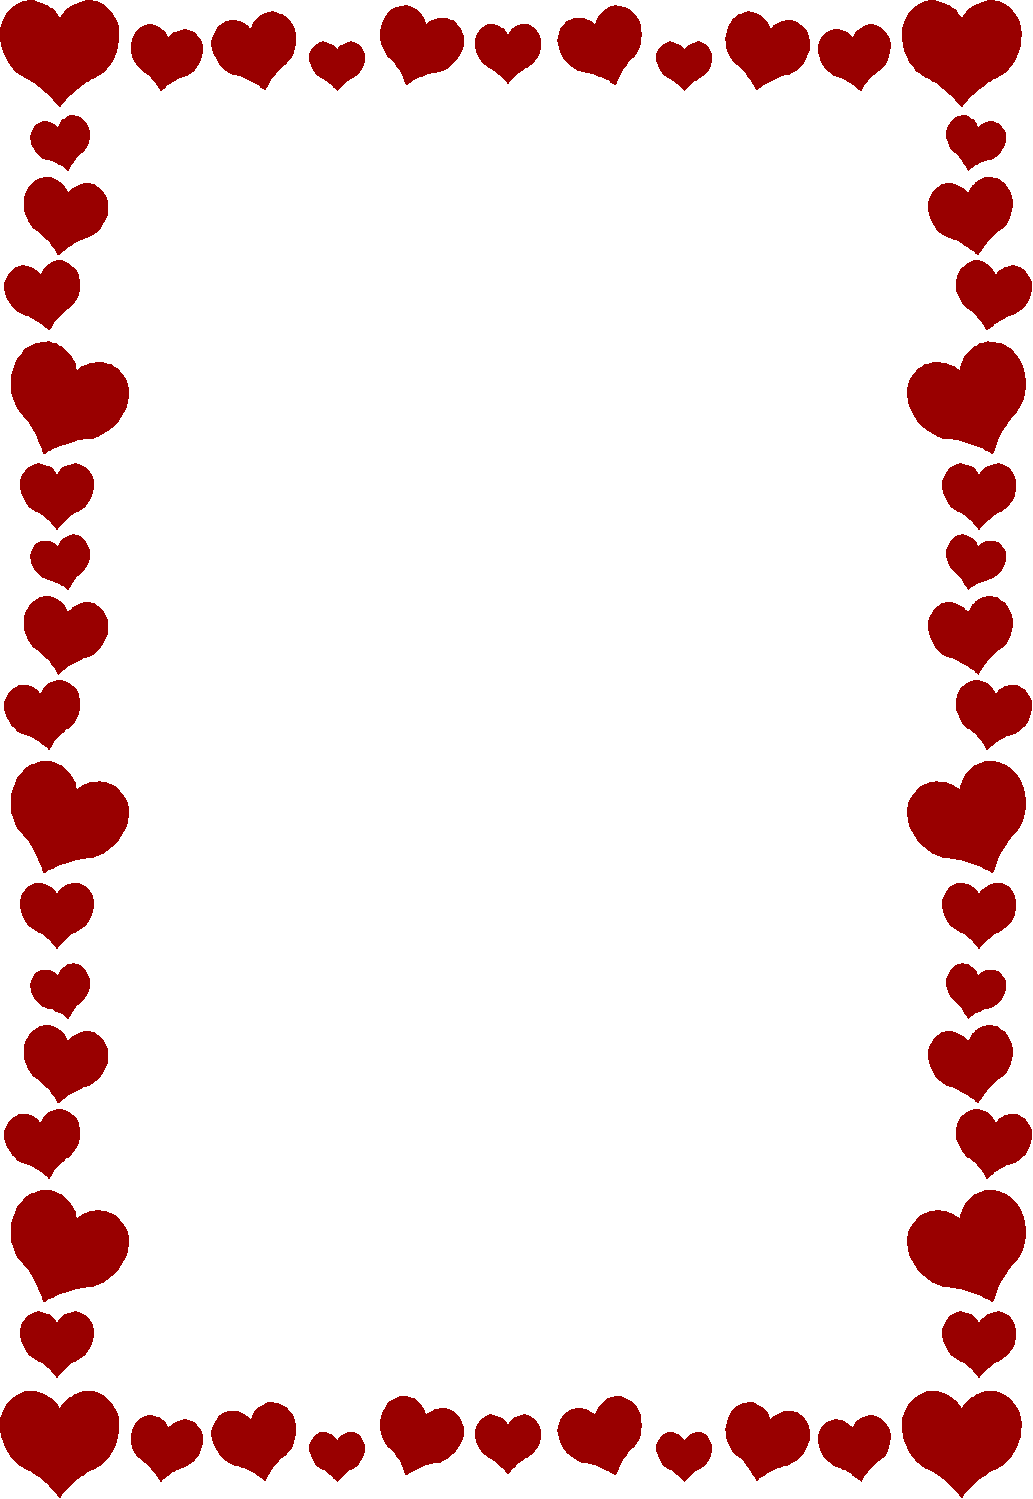 Valentines Day Clipart Border - Coloring Page For Kids